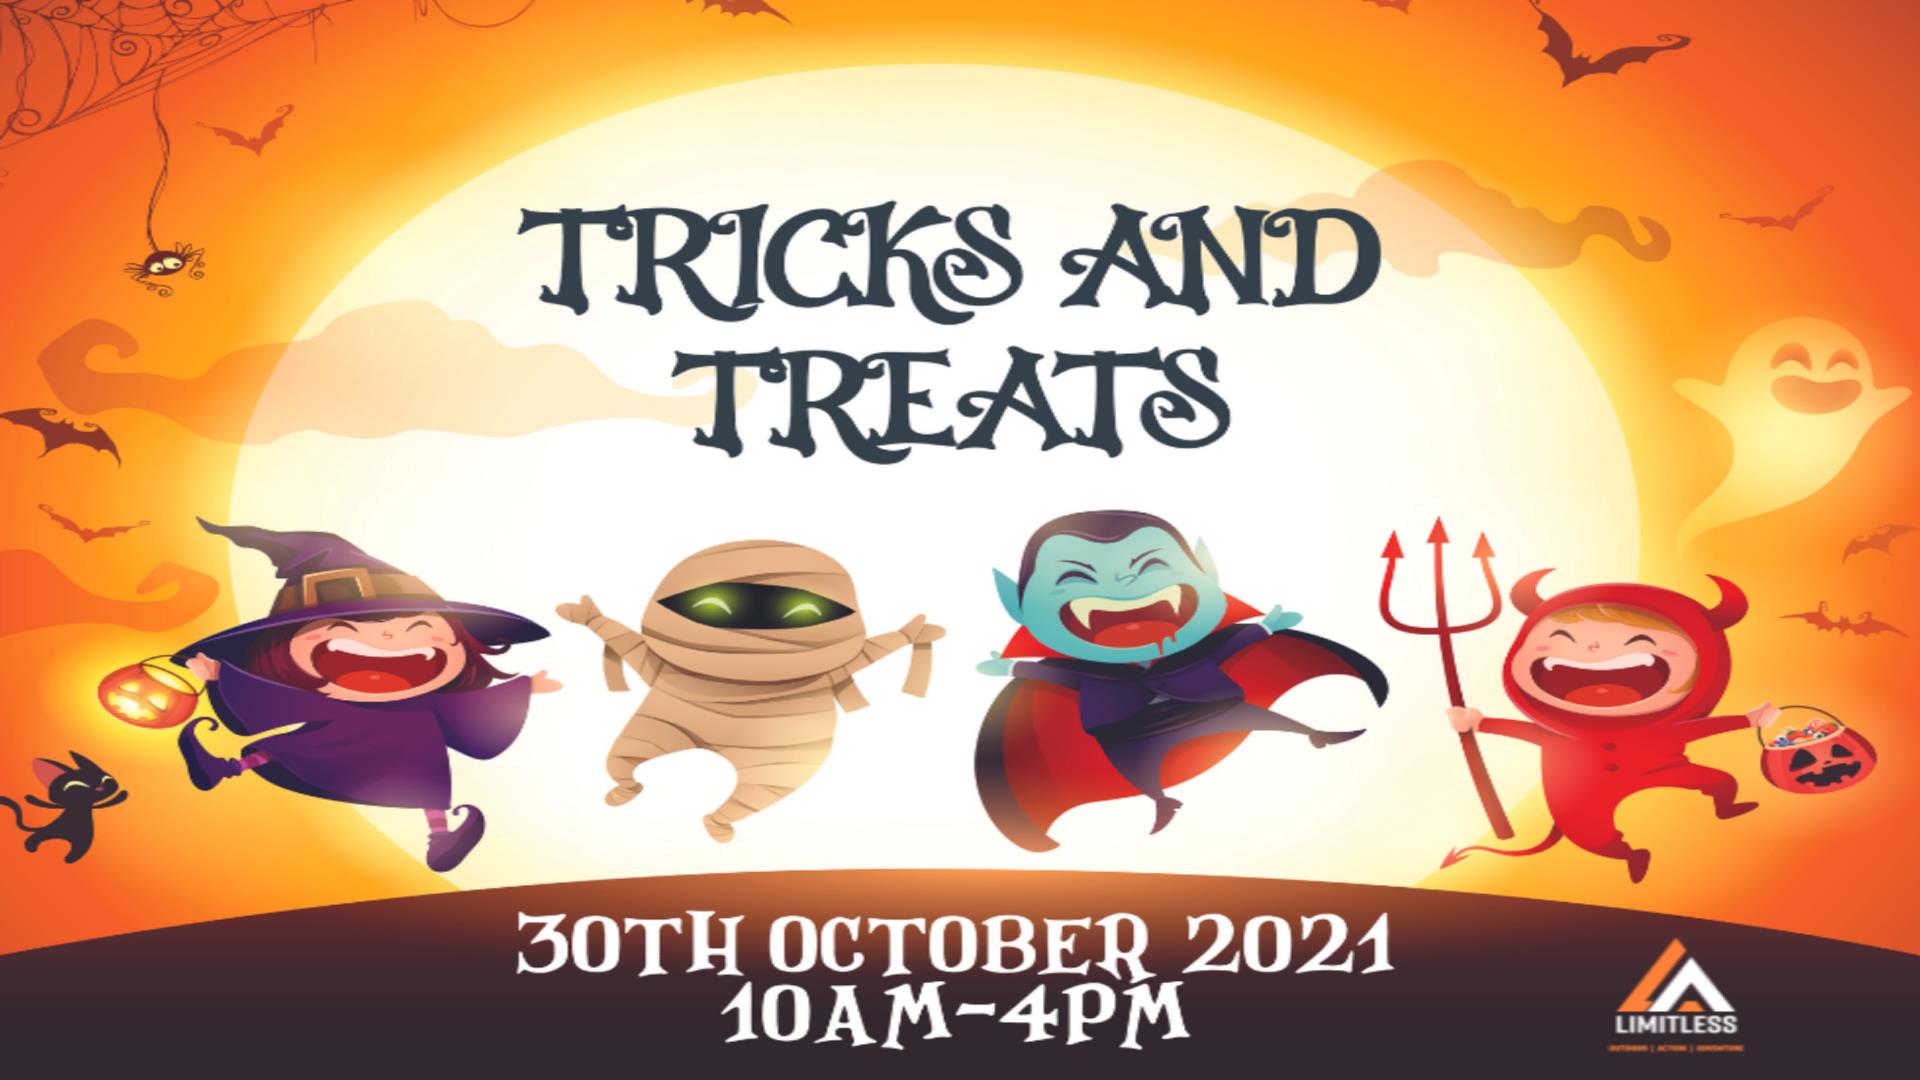 This is a promotional poster for the 'Tricks and Treats' event organised by Limitless. It displays a series of Halloween-related cartoon characters.